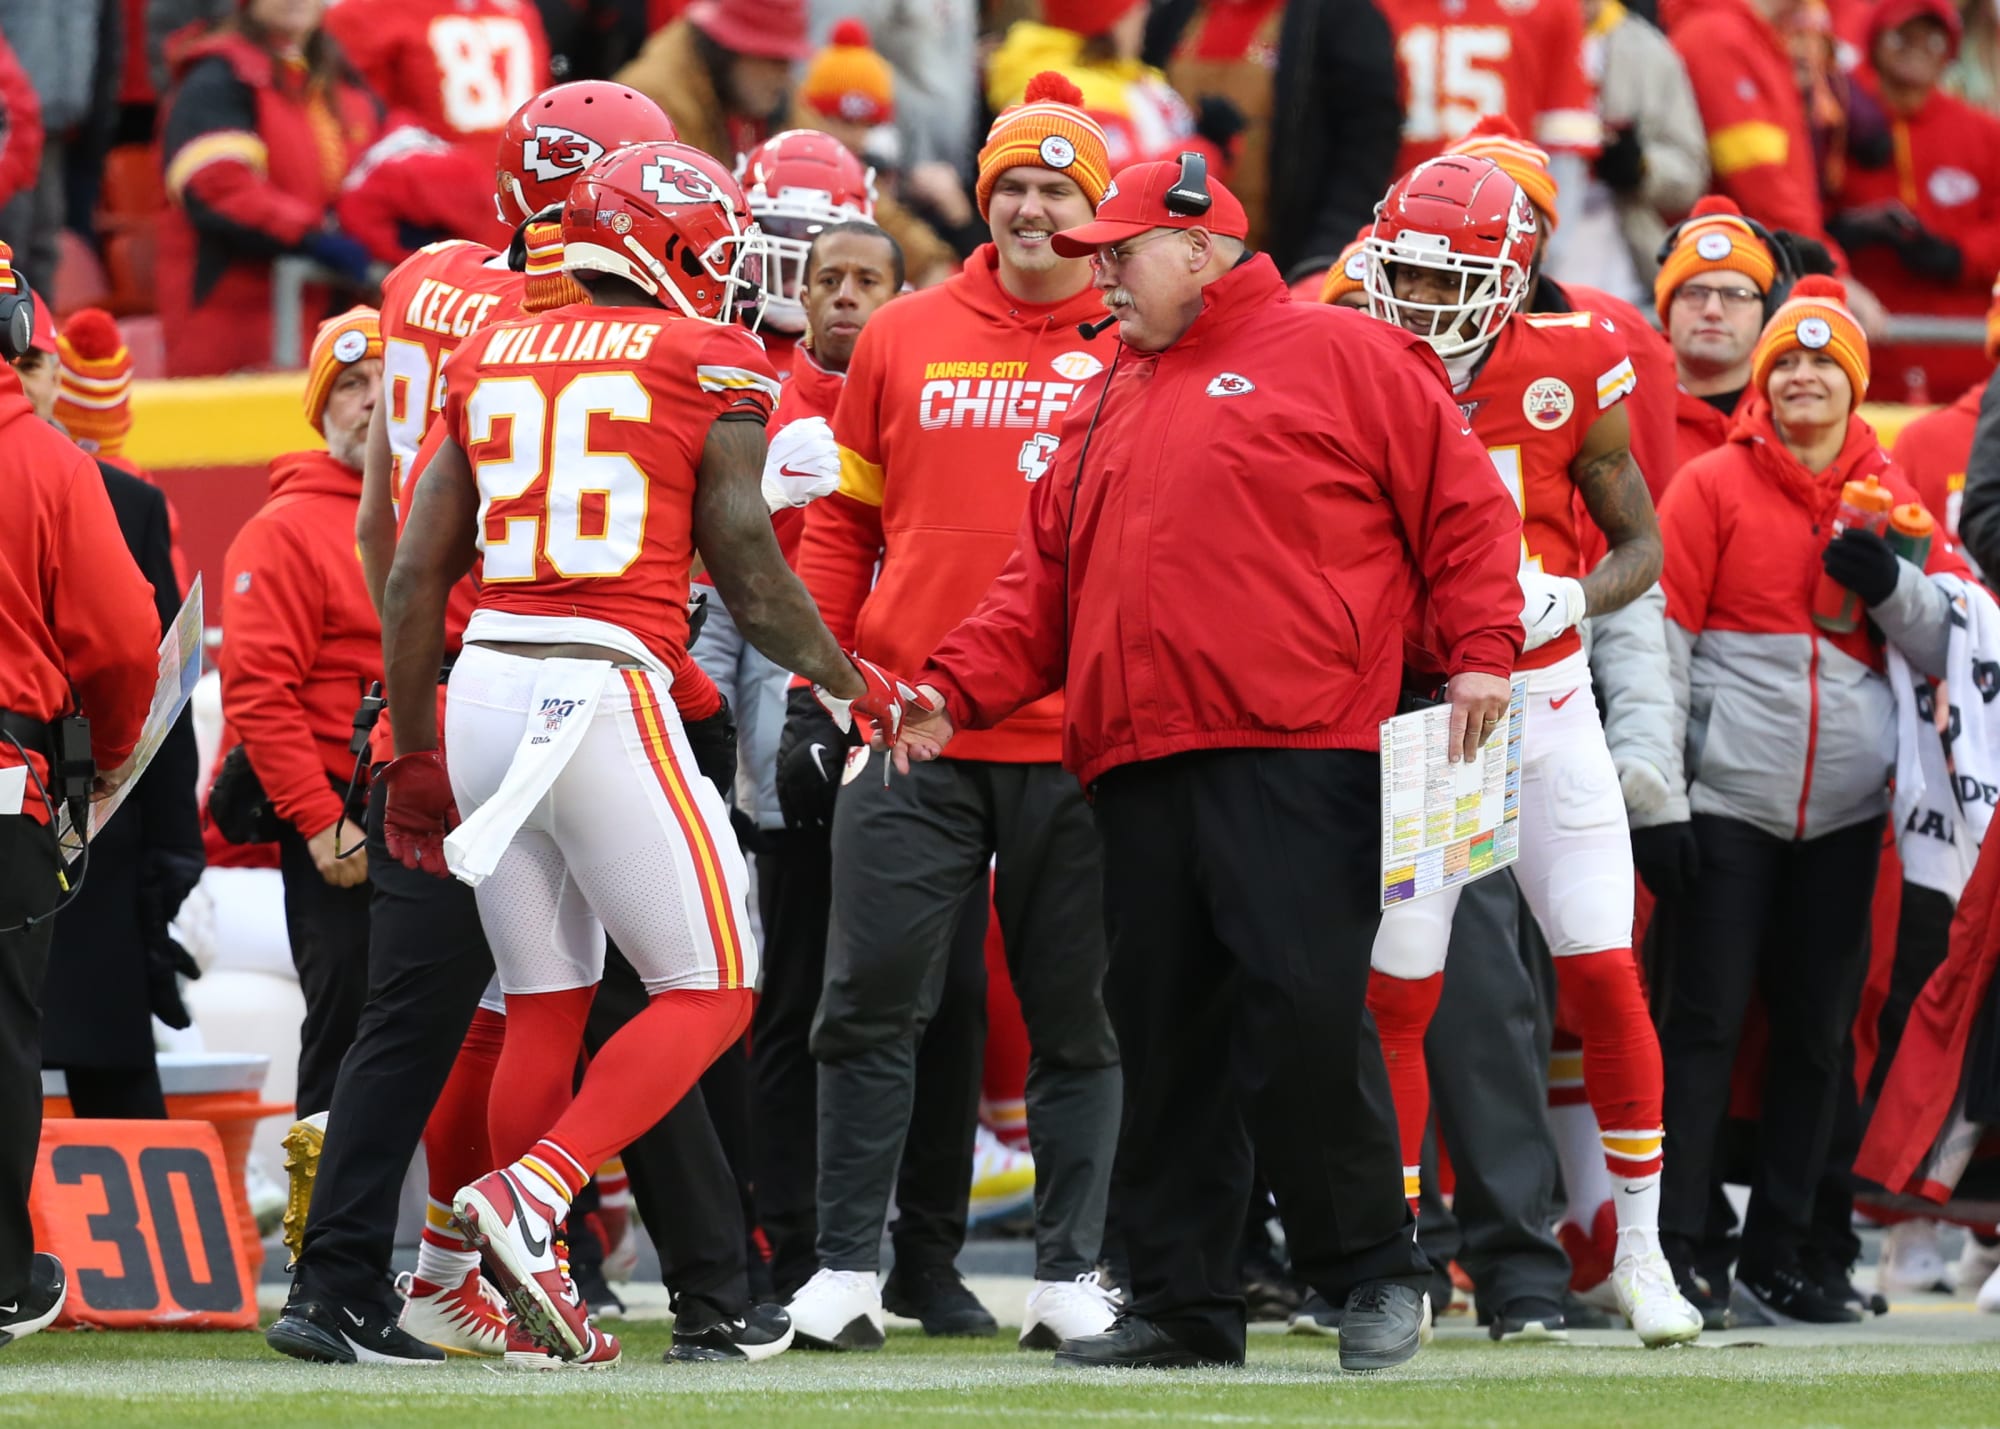 Kansas City Chiefs: NFL playoff picture after week 17 of 2019